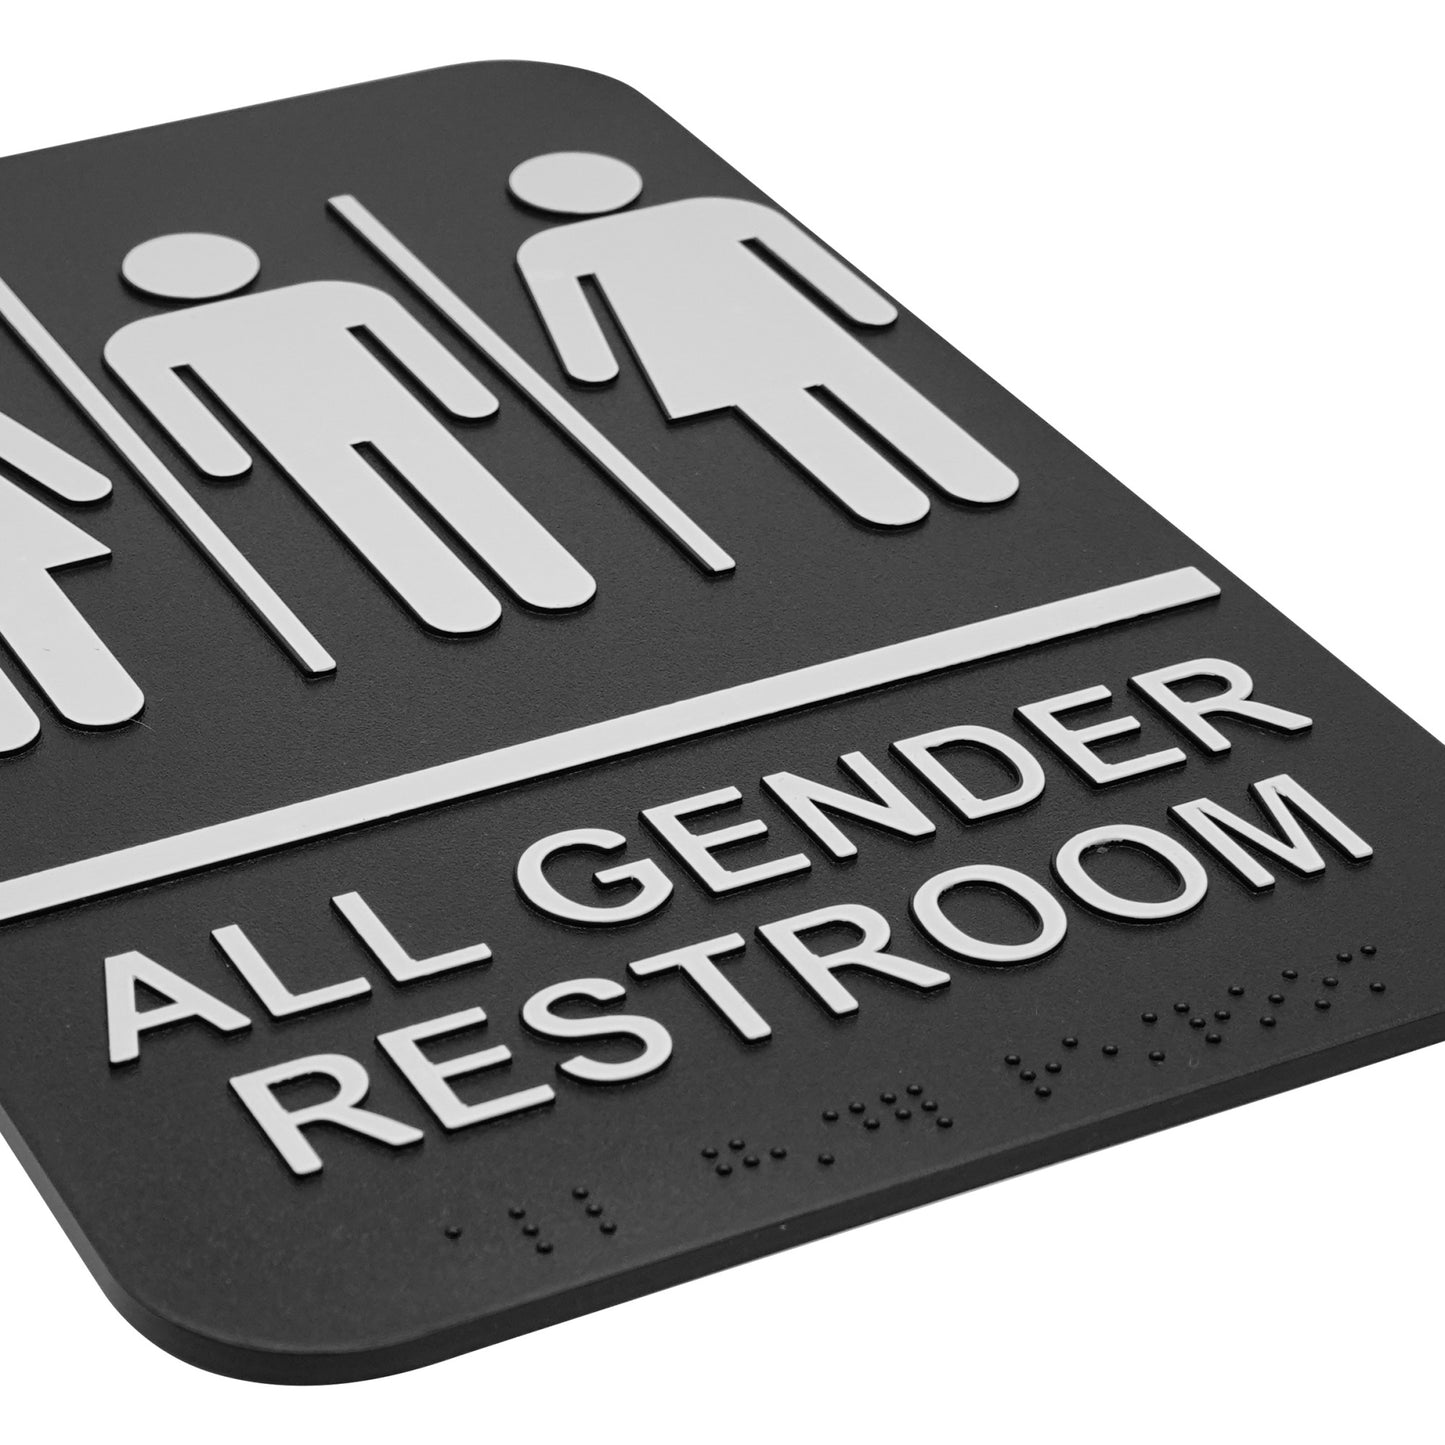 SGNB-607 - Information Signs with Braille, 6"W x 9"H - All Gender Restroom